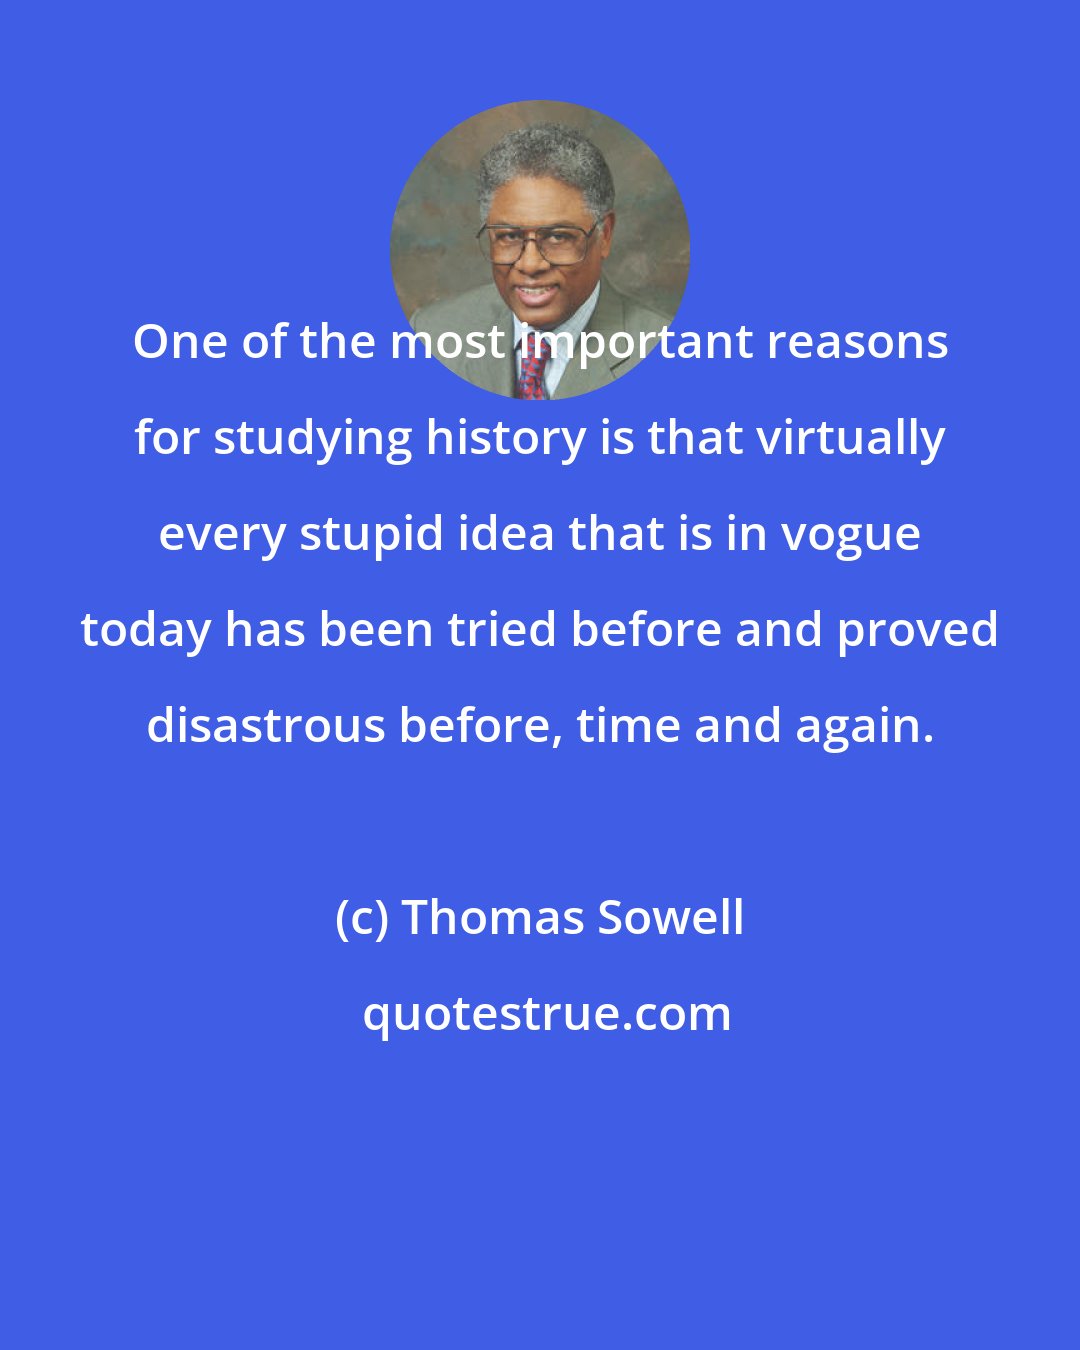 Thomas Sowell: One of the most important reasons for studying history is that virtually every stupid idea that is in vogue today has been tried before and proved disastrous before, time and again.